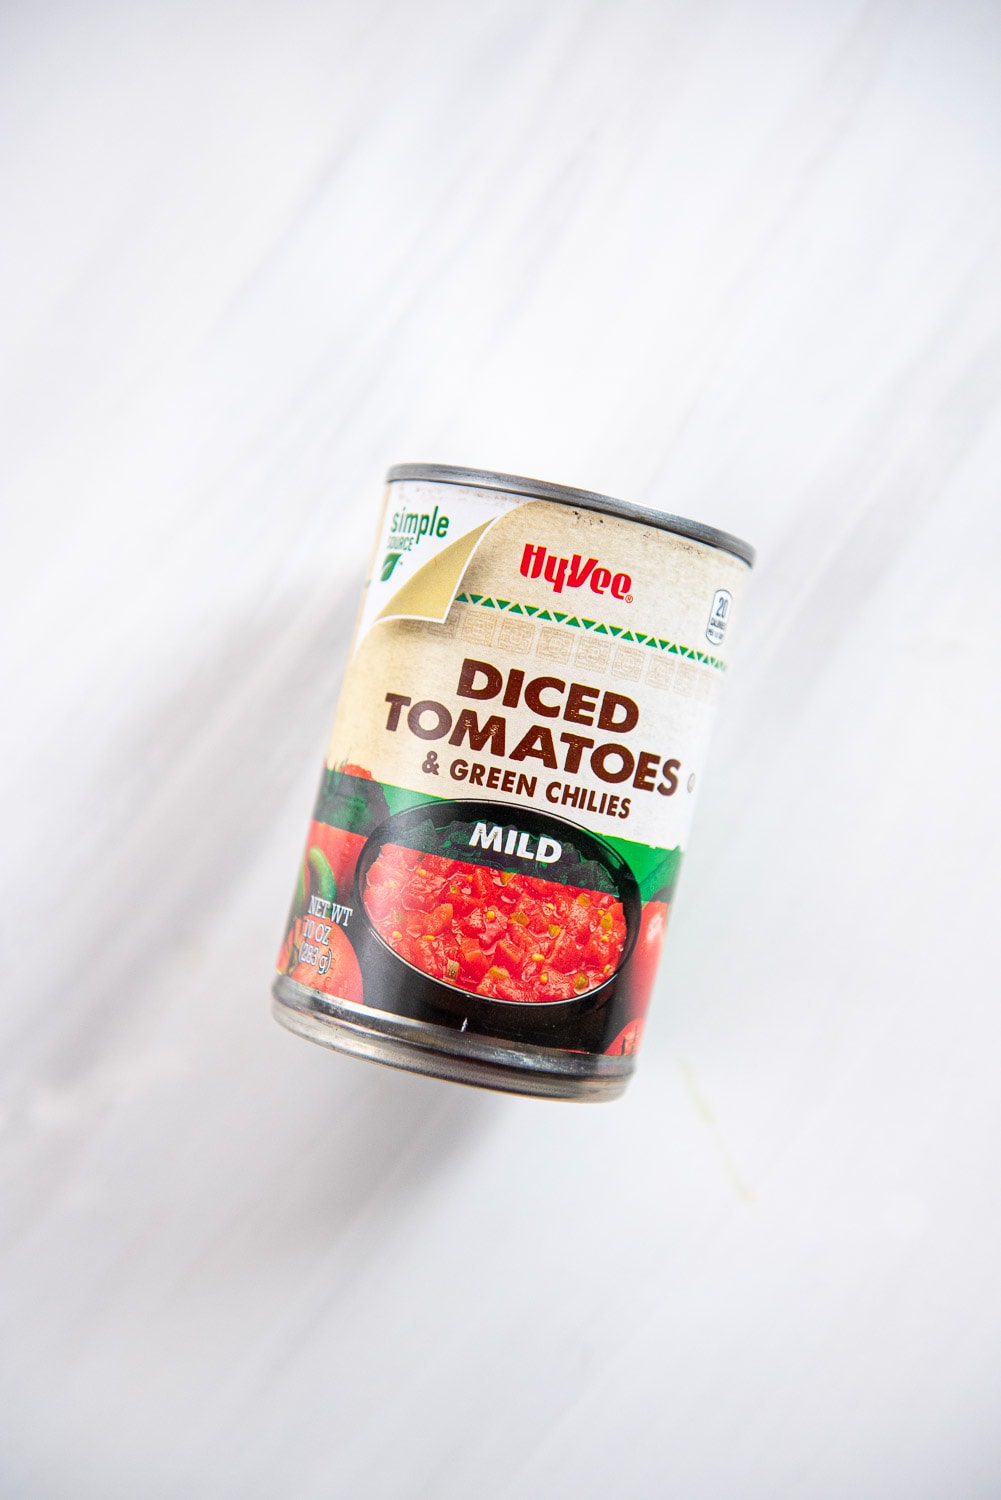 10 oz can of diced tomatoes & green chilies